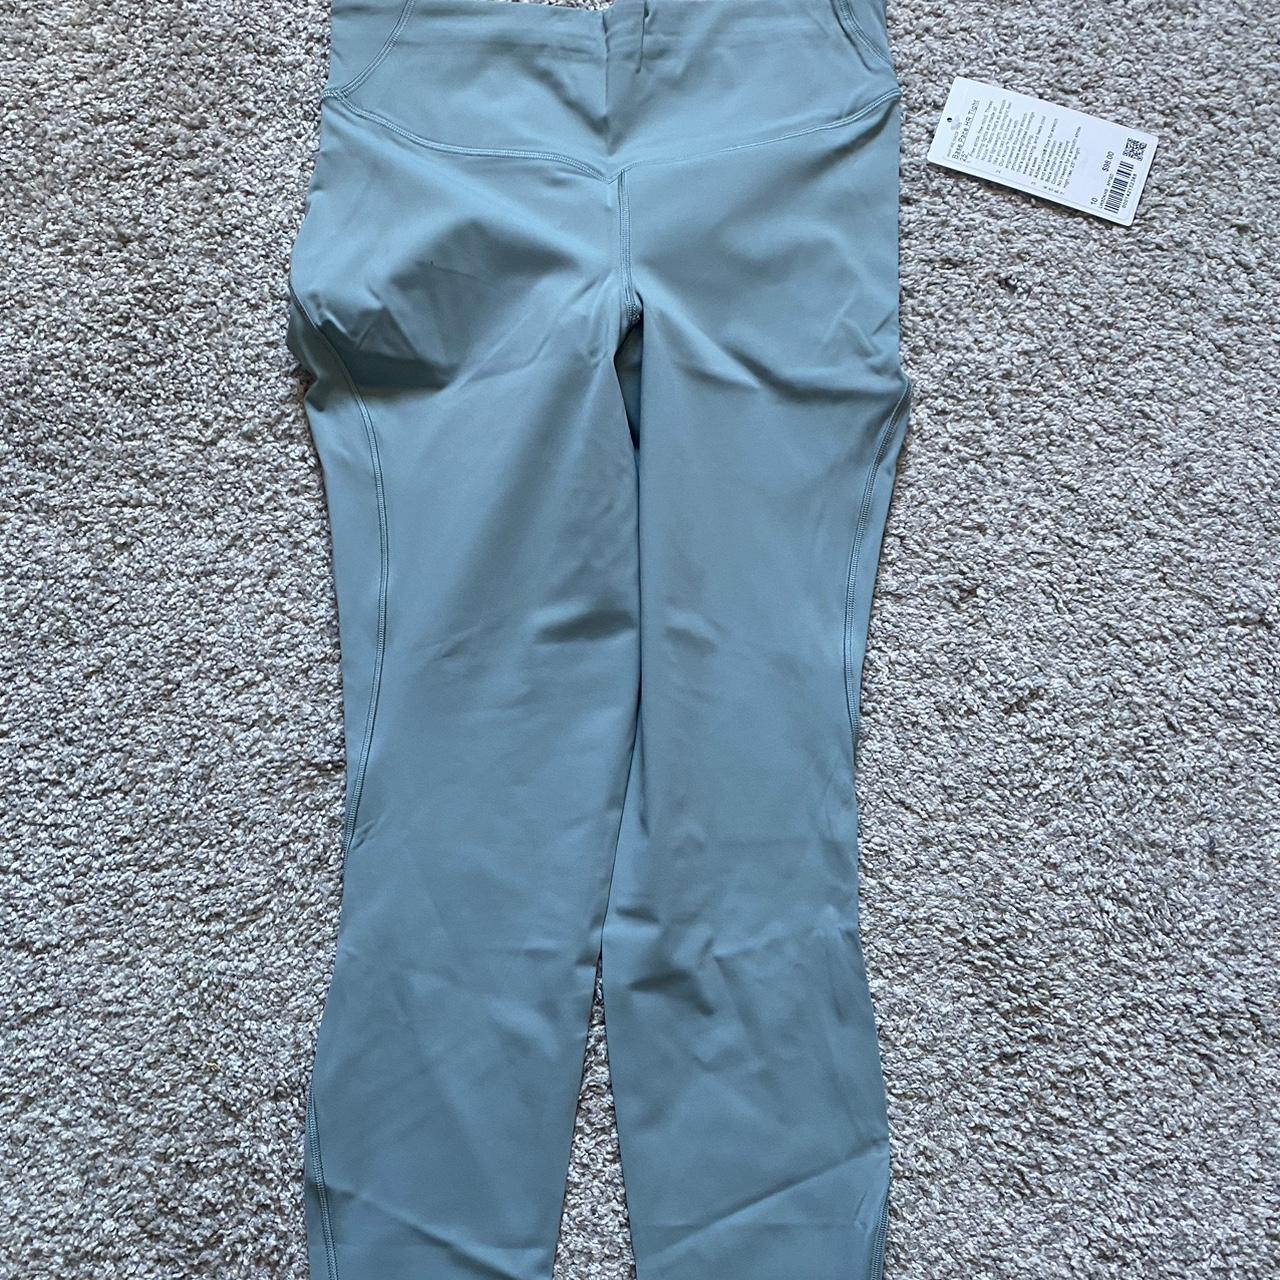 lululemon size 10 base pace hr tight 25” these - Depop